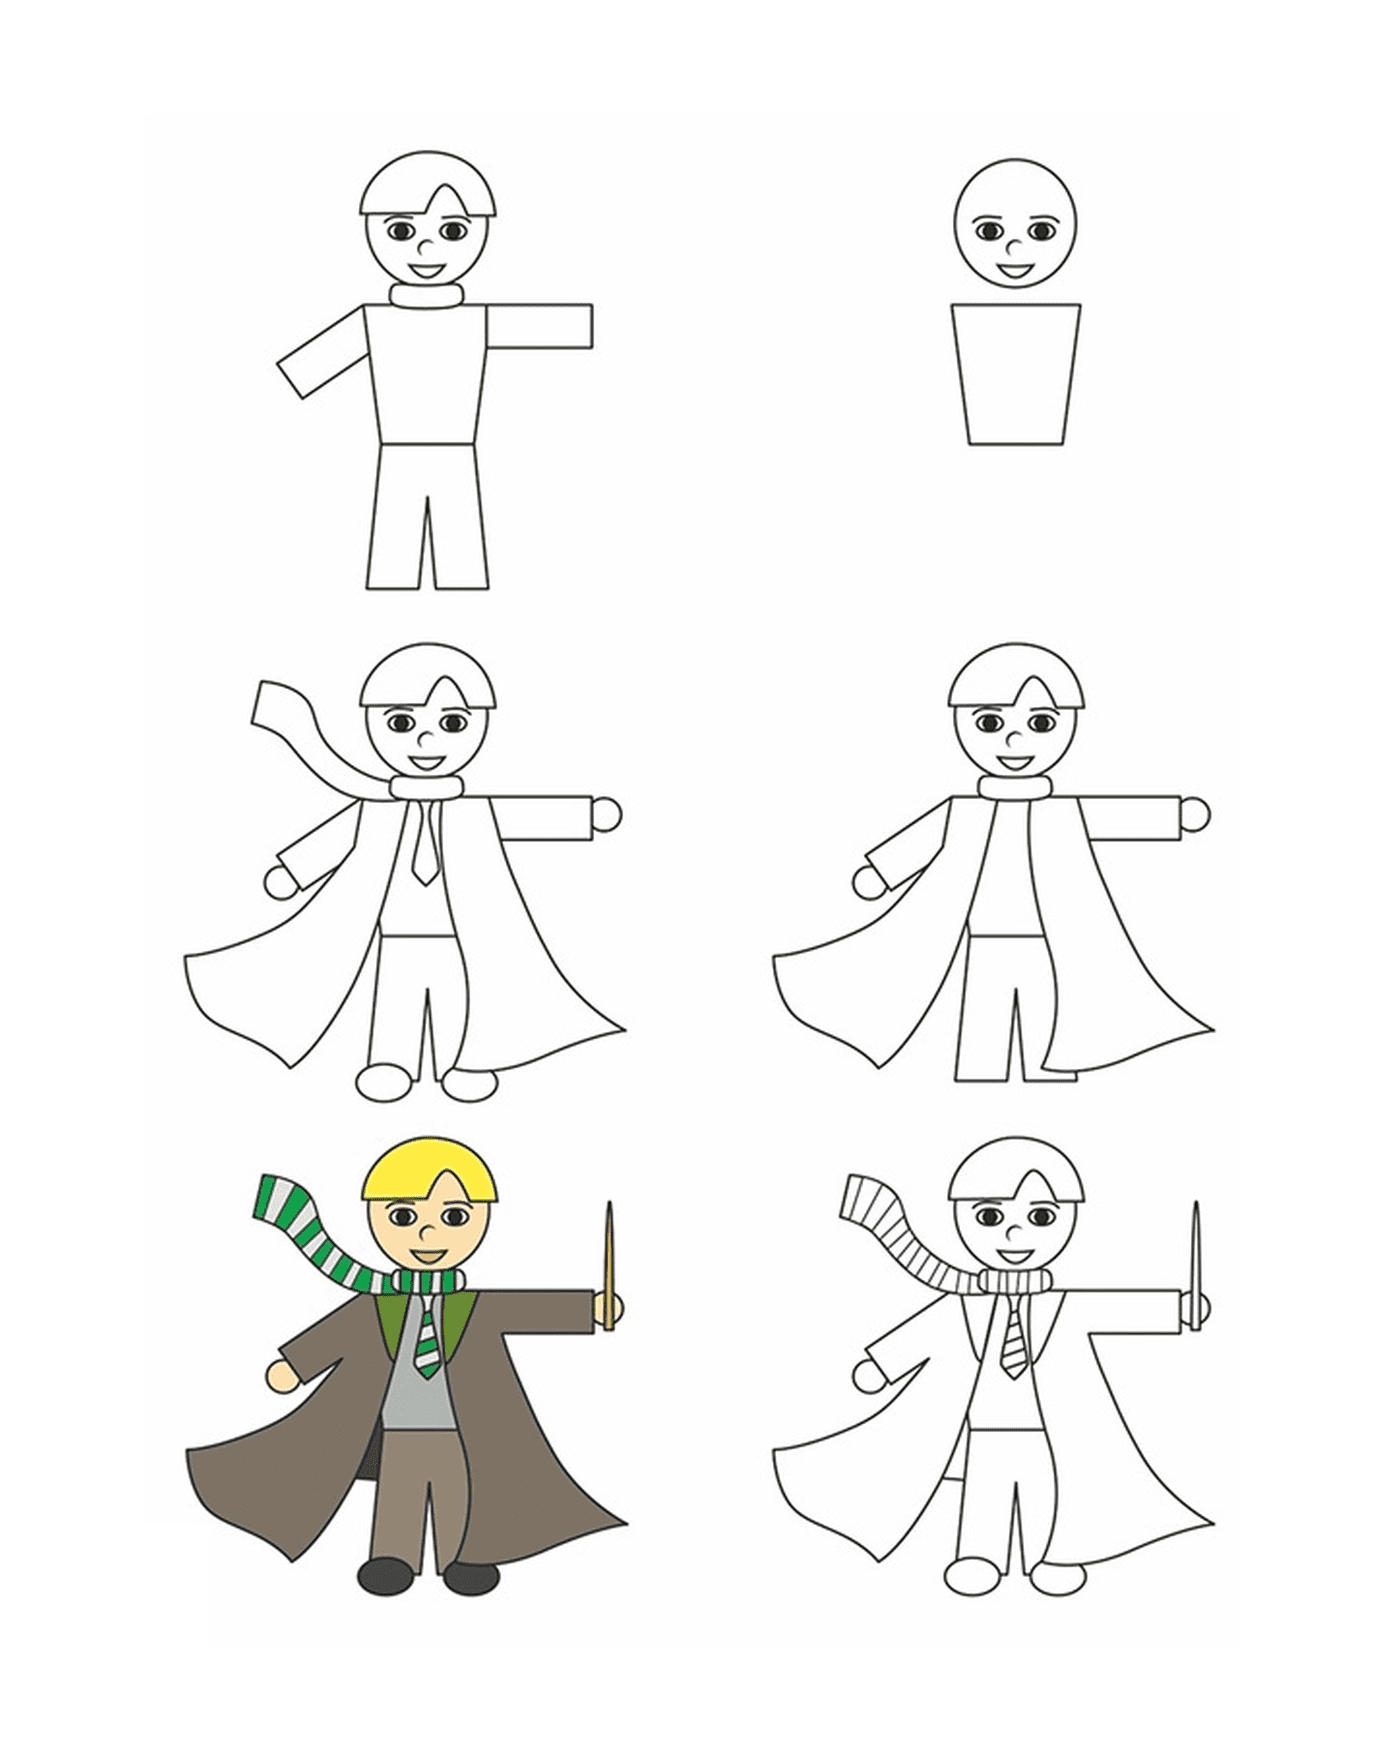  How to draw a Harry Potter character step by step 